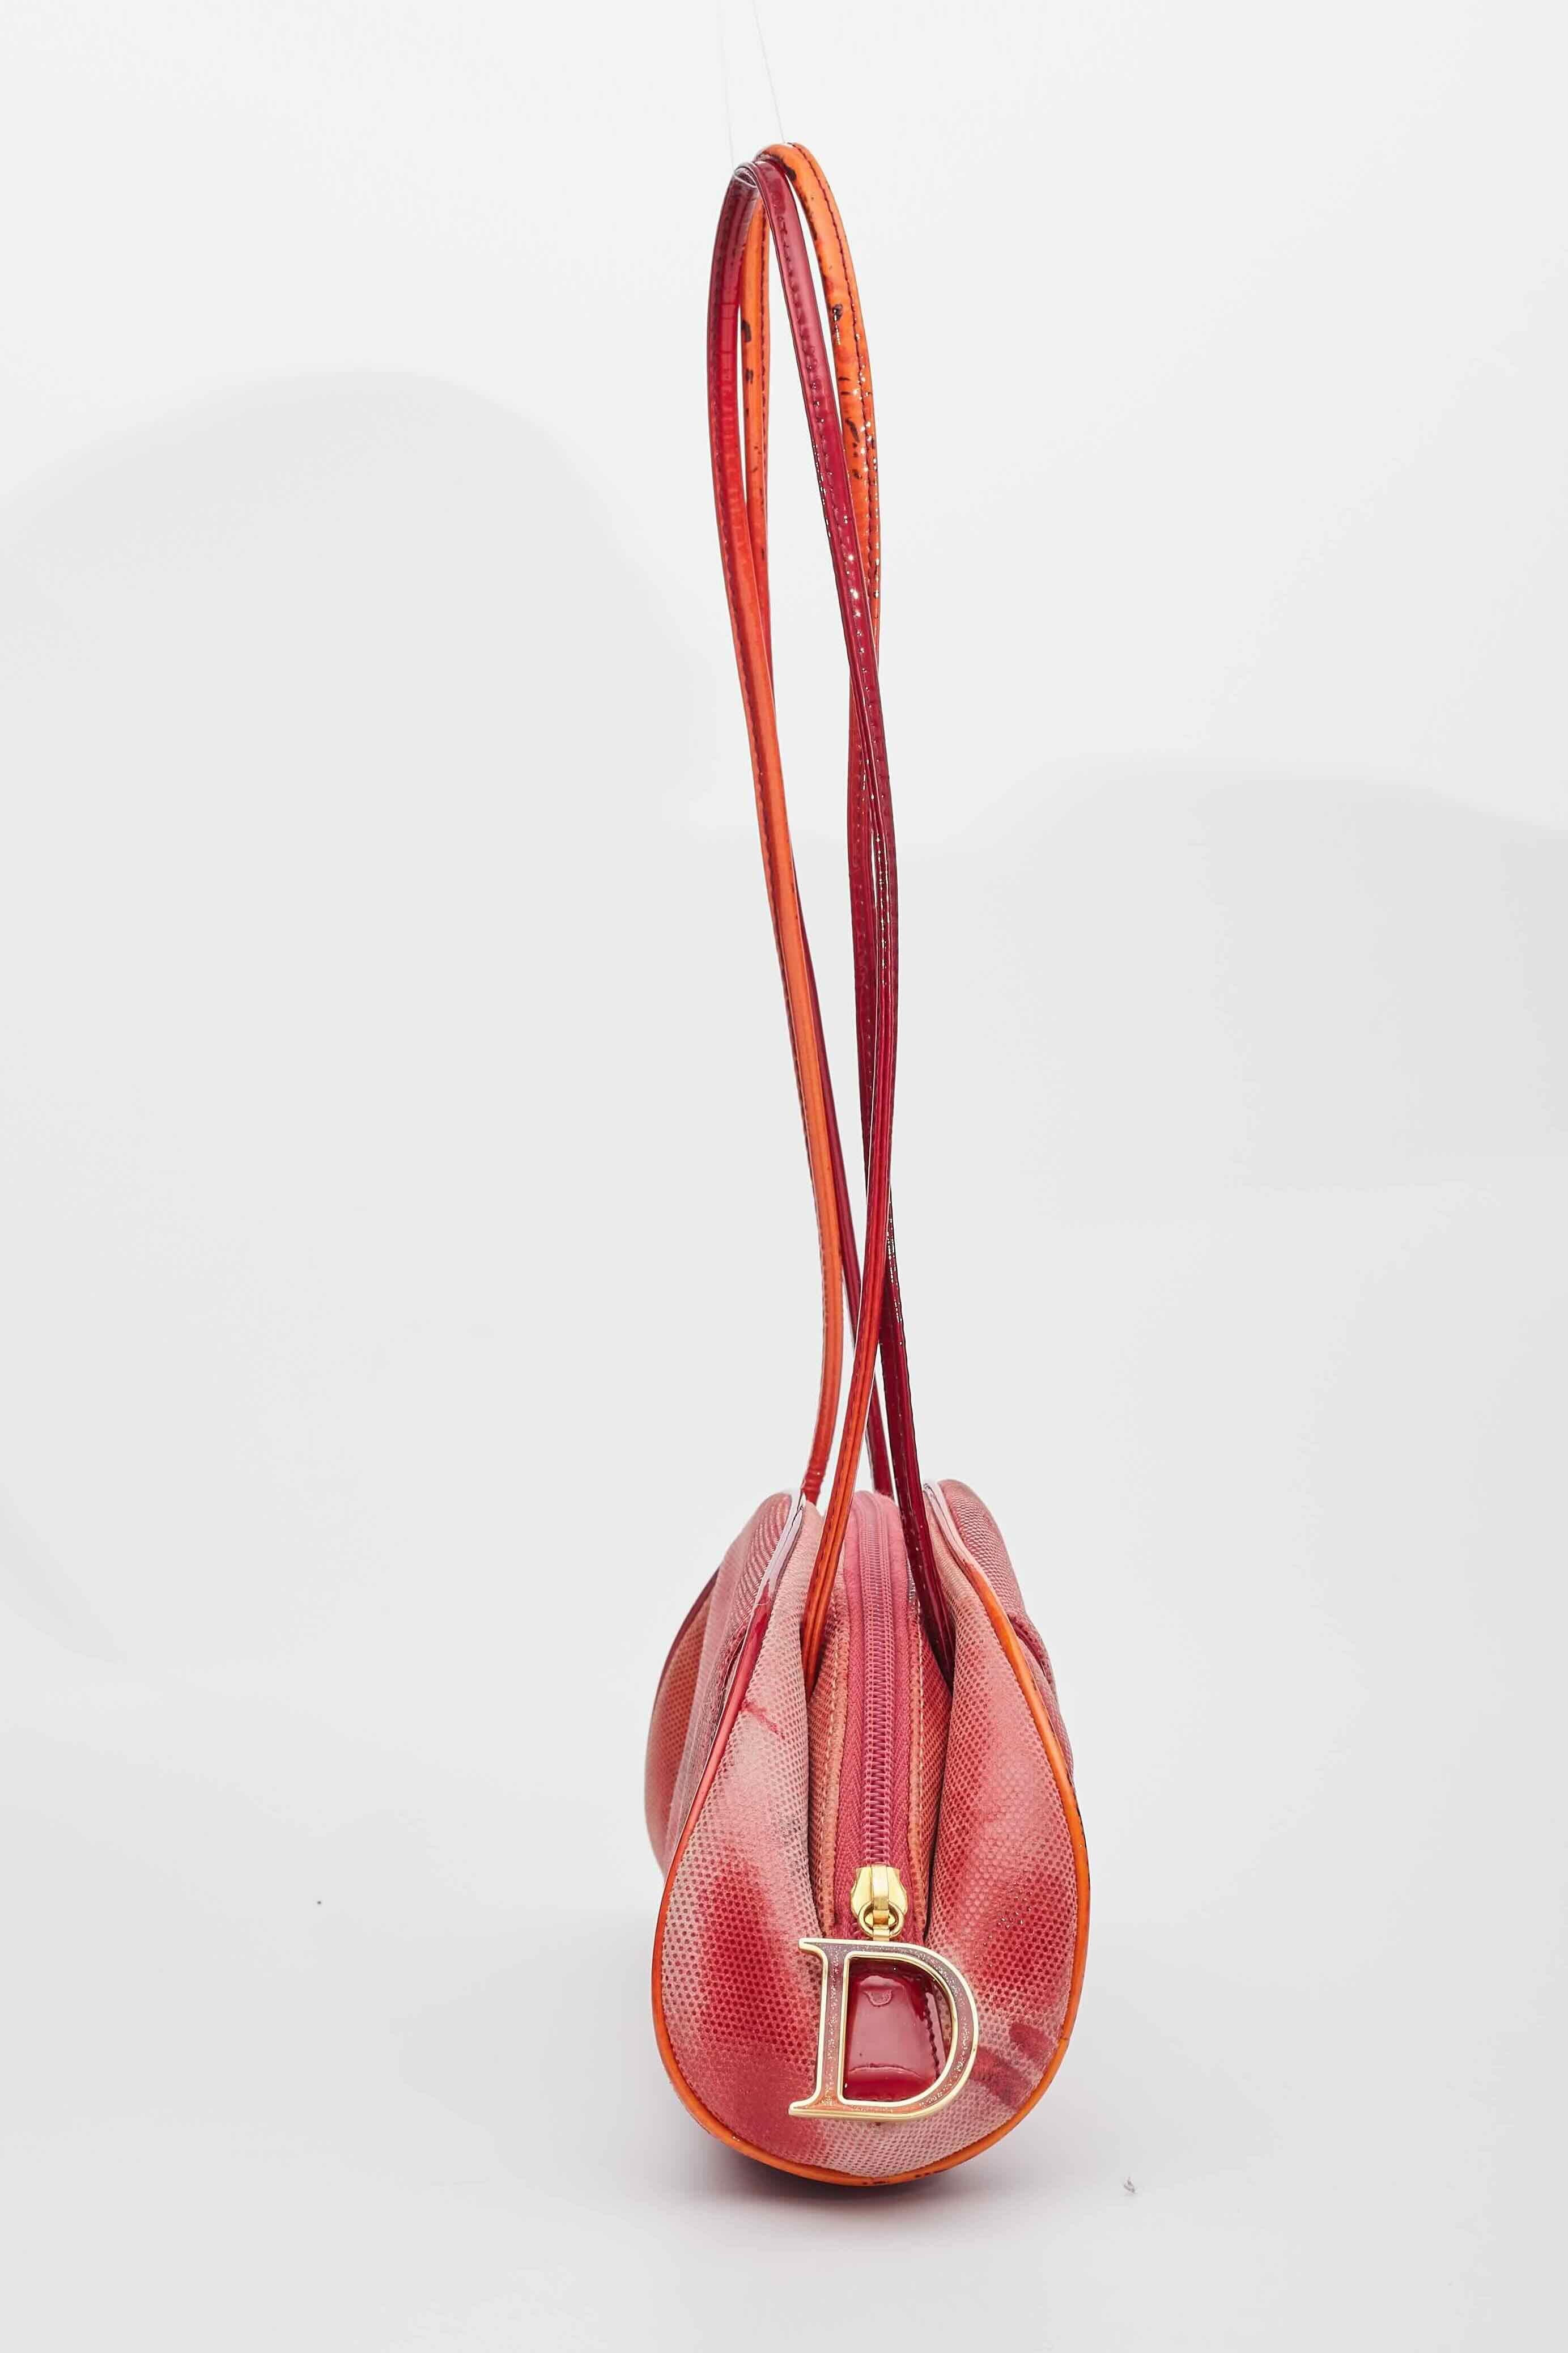 Dior Suede Oyster Multi Red Shoulder Bag In Good Condition For Sale In Montreal, Quebec